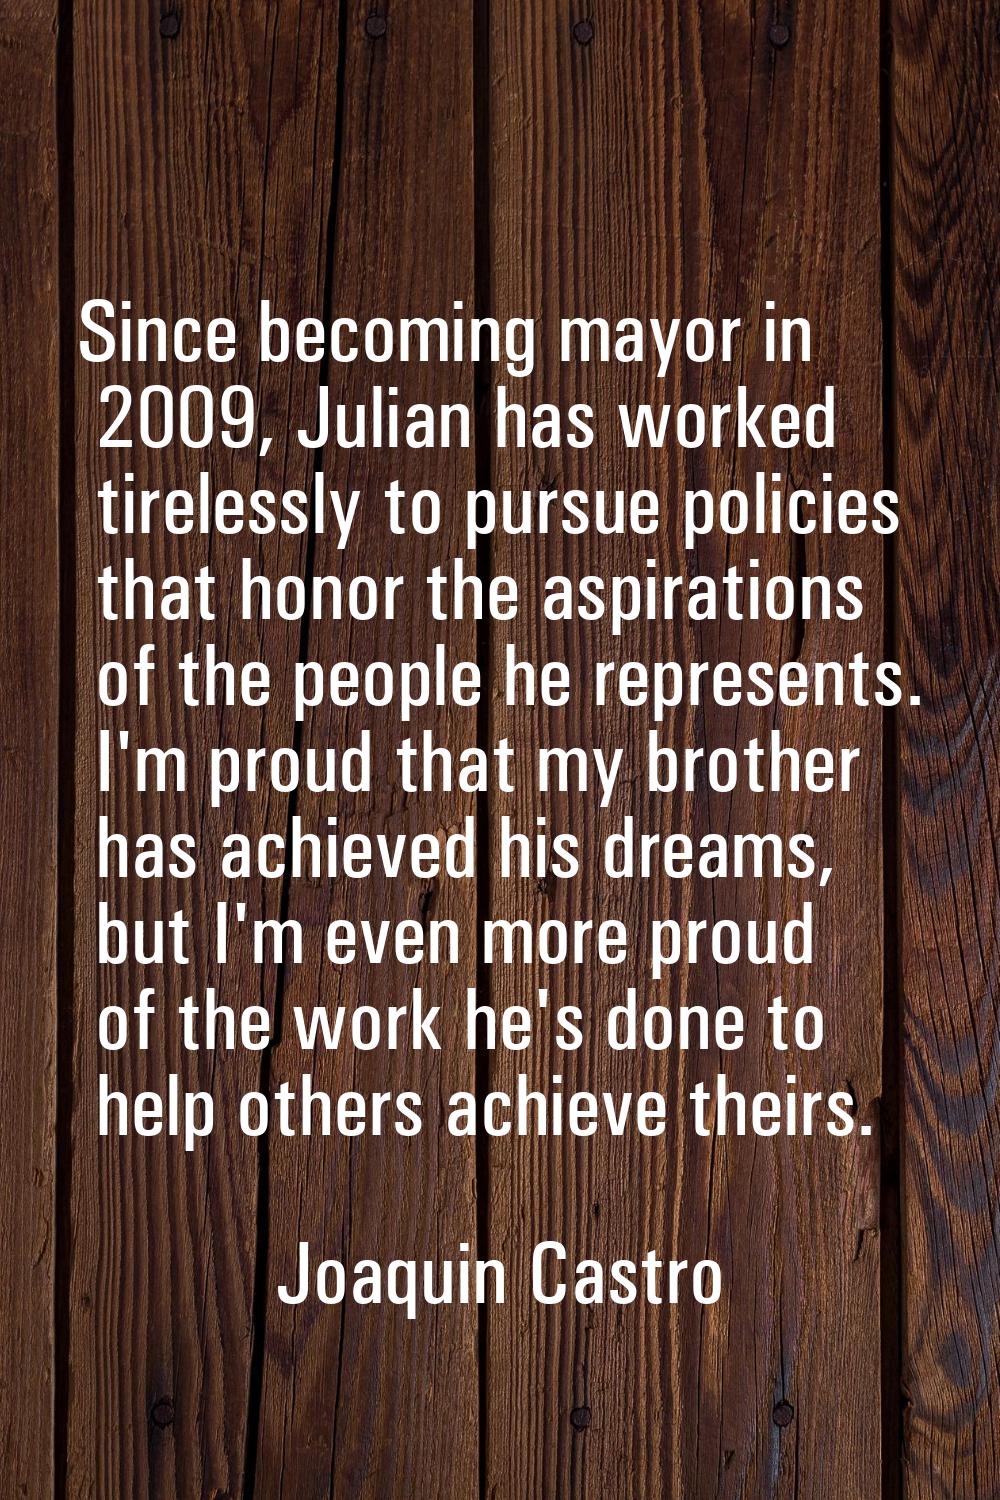 Since becoming mayor in 2009, Julian has worked tirelessly to pursue policies that honor the aspira